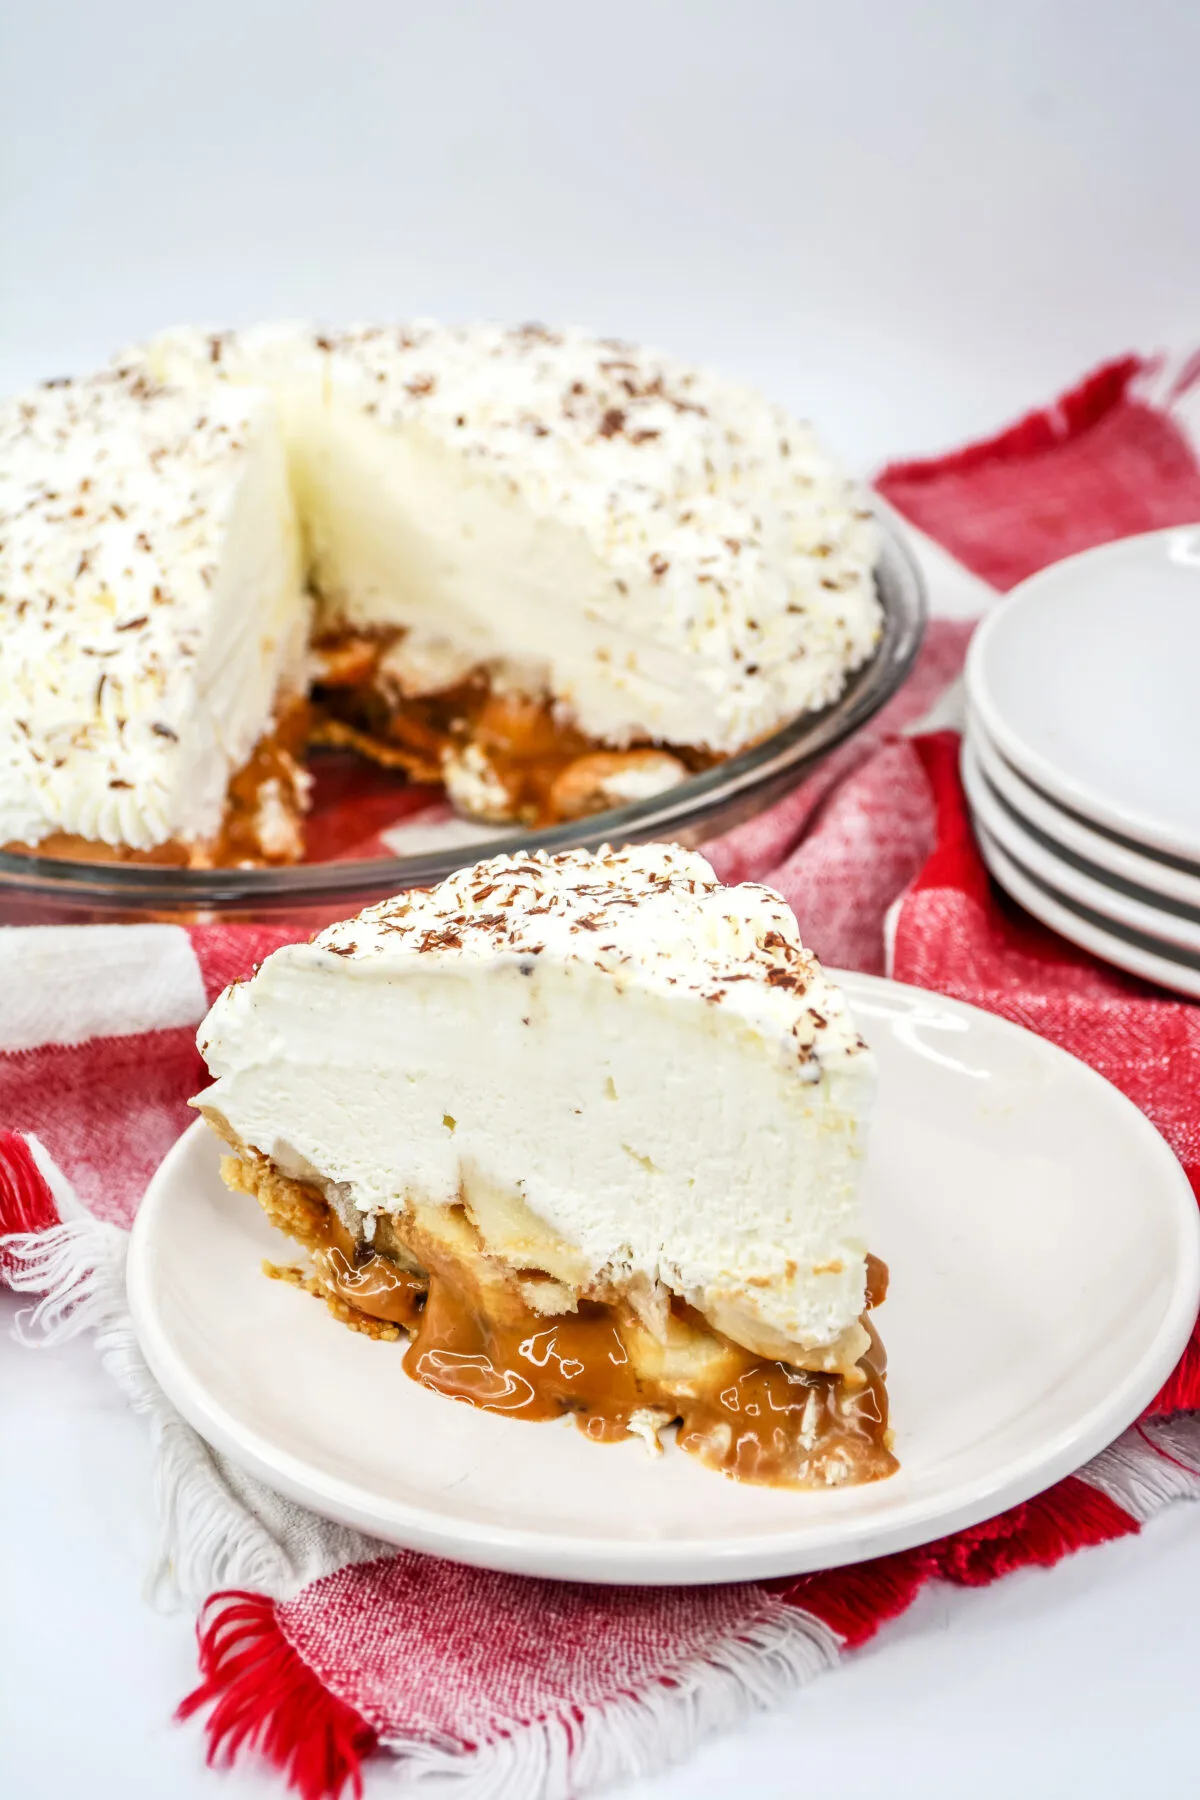 A classic English dessert, this banoffee pie recipe is easy to make and combines the taste of toffee, bananas, and cream into a tasty treat.